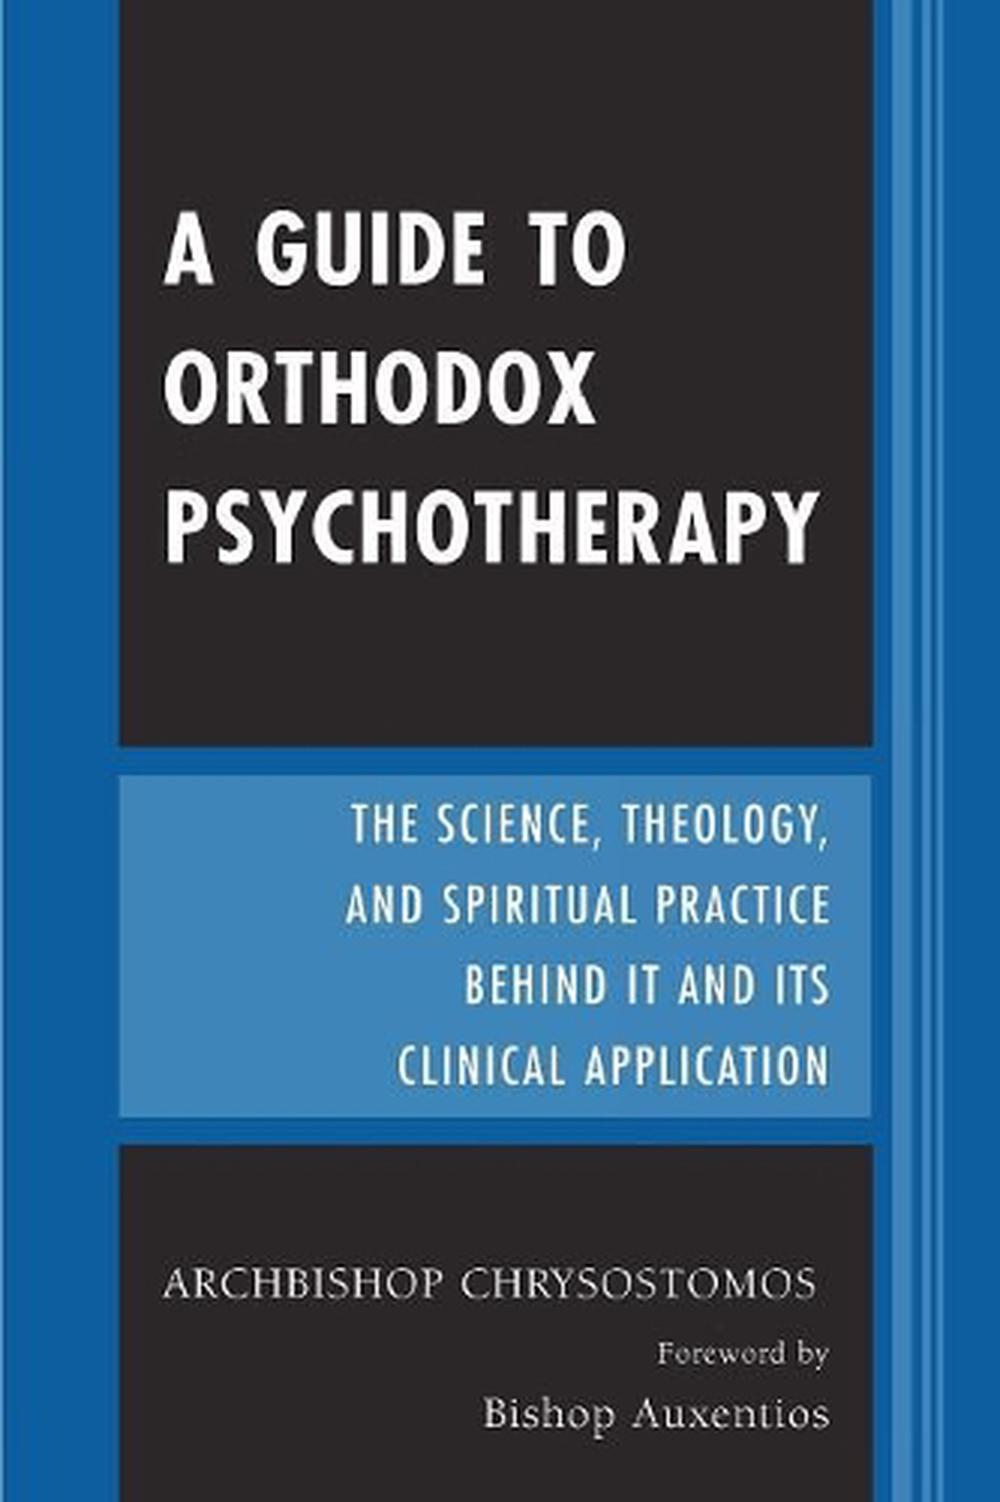 A Guide to Orthodox Psychotherapy: The Science, Theology, and Spiritual ...